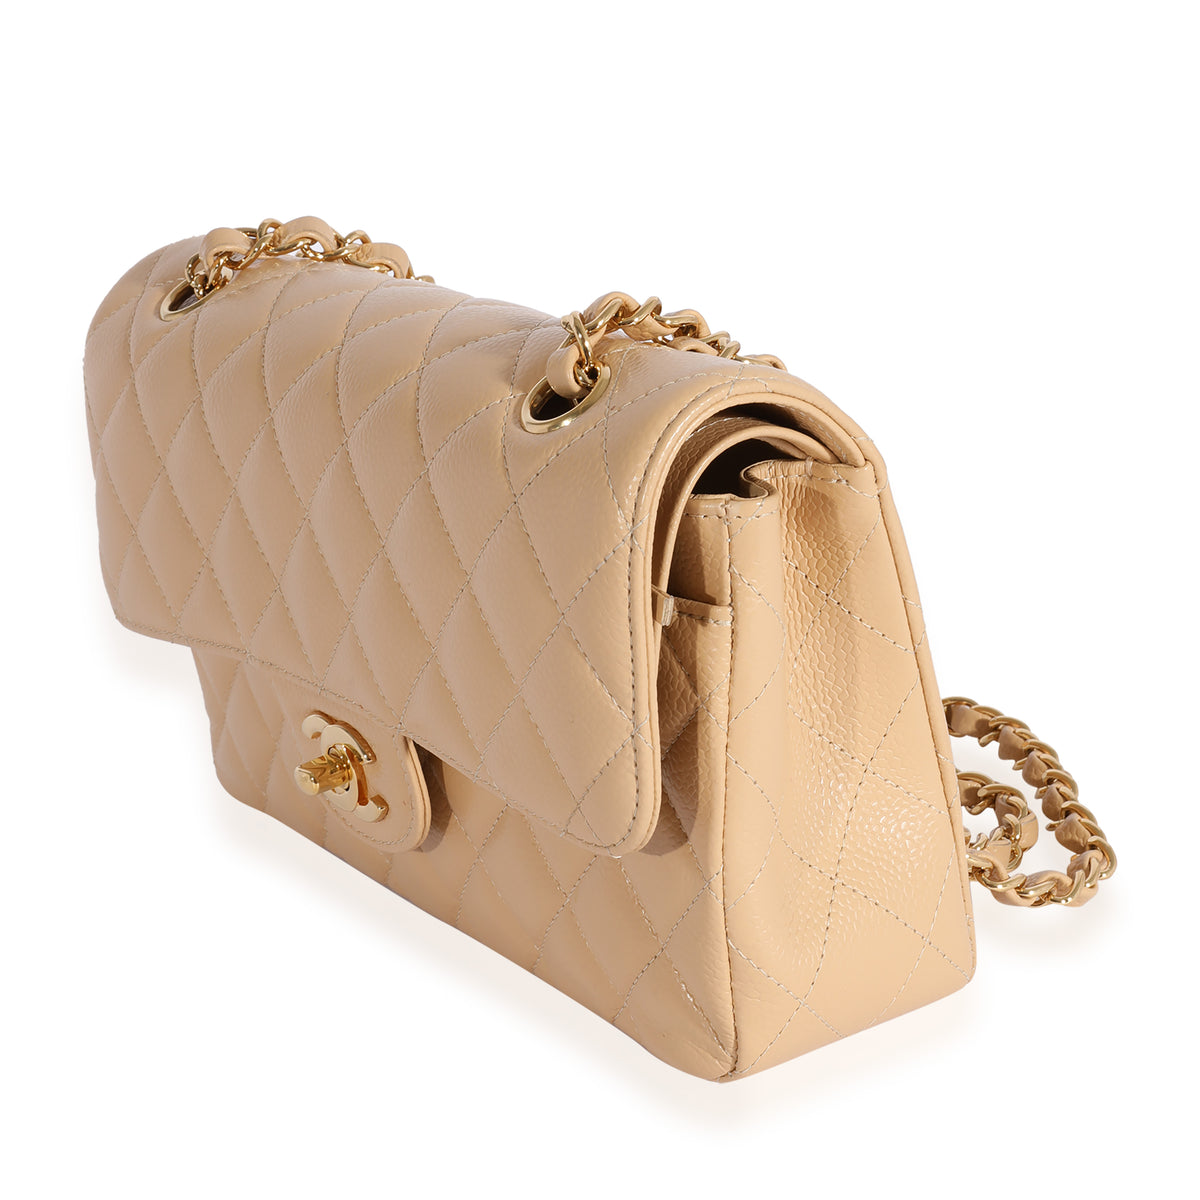 Chanel Beige Clair Quilted Caviar Leather Classic Jumbo Double